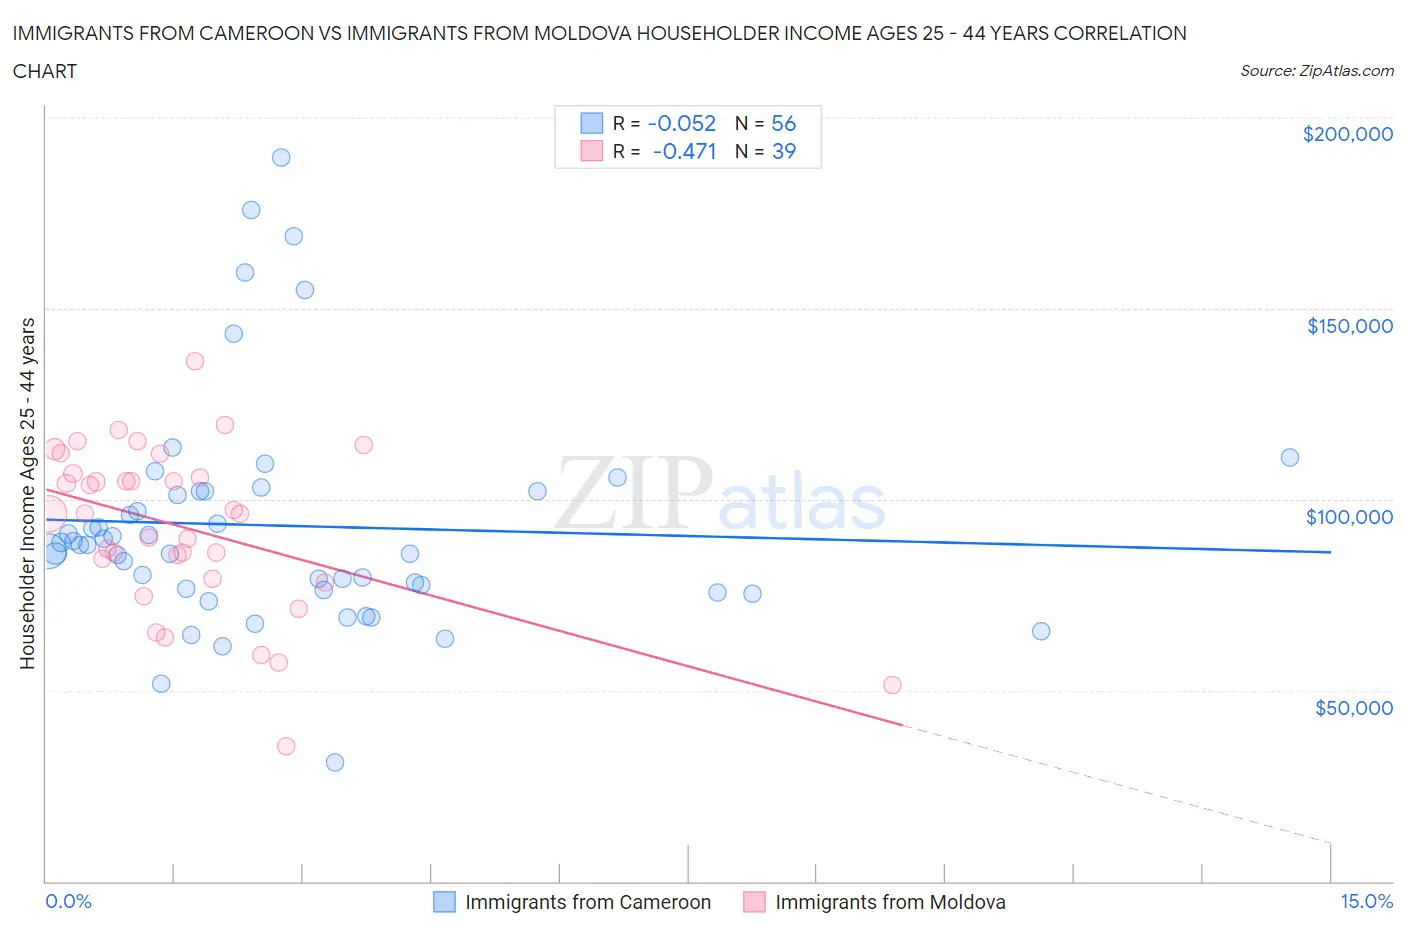 Immigrants from Cameroon vs Immigrants from Moldova Householder Income Ages 25 - 44 years